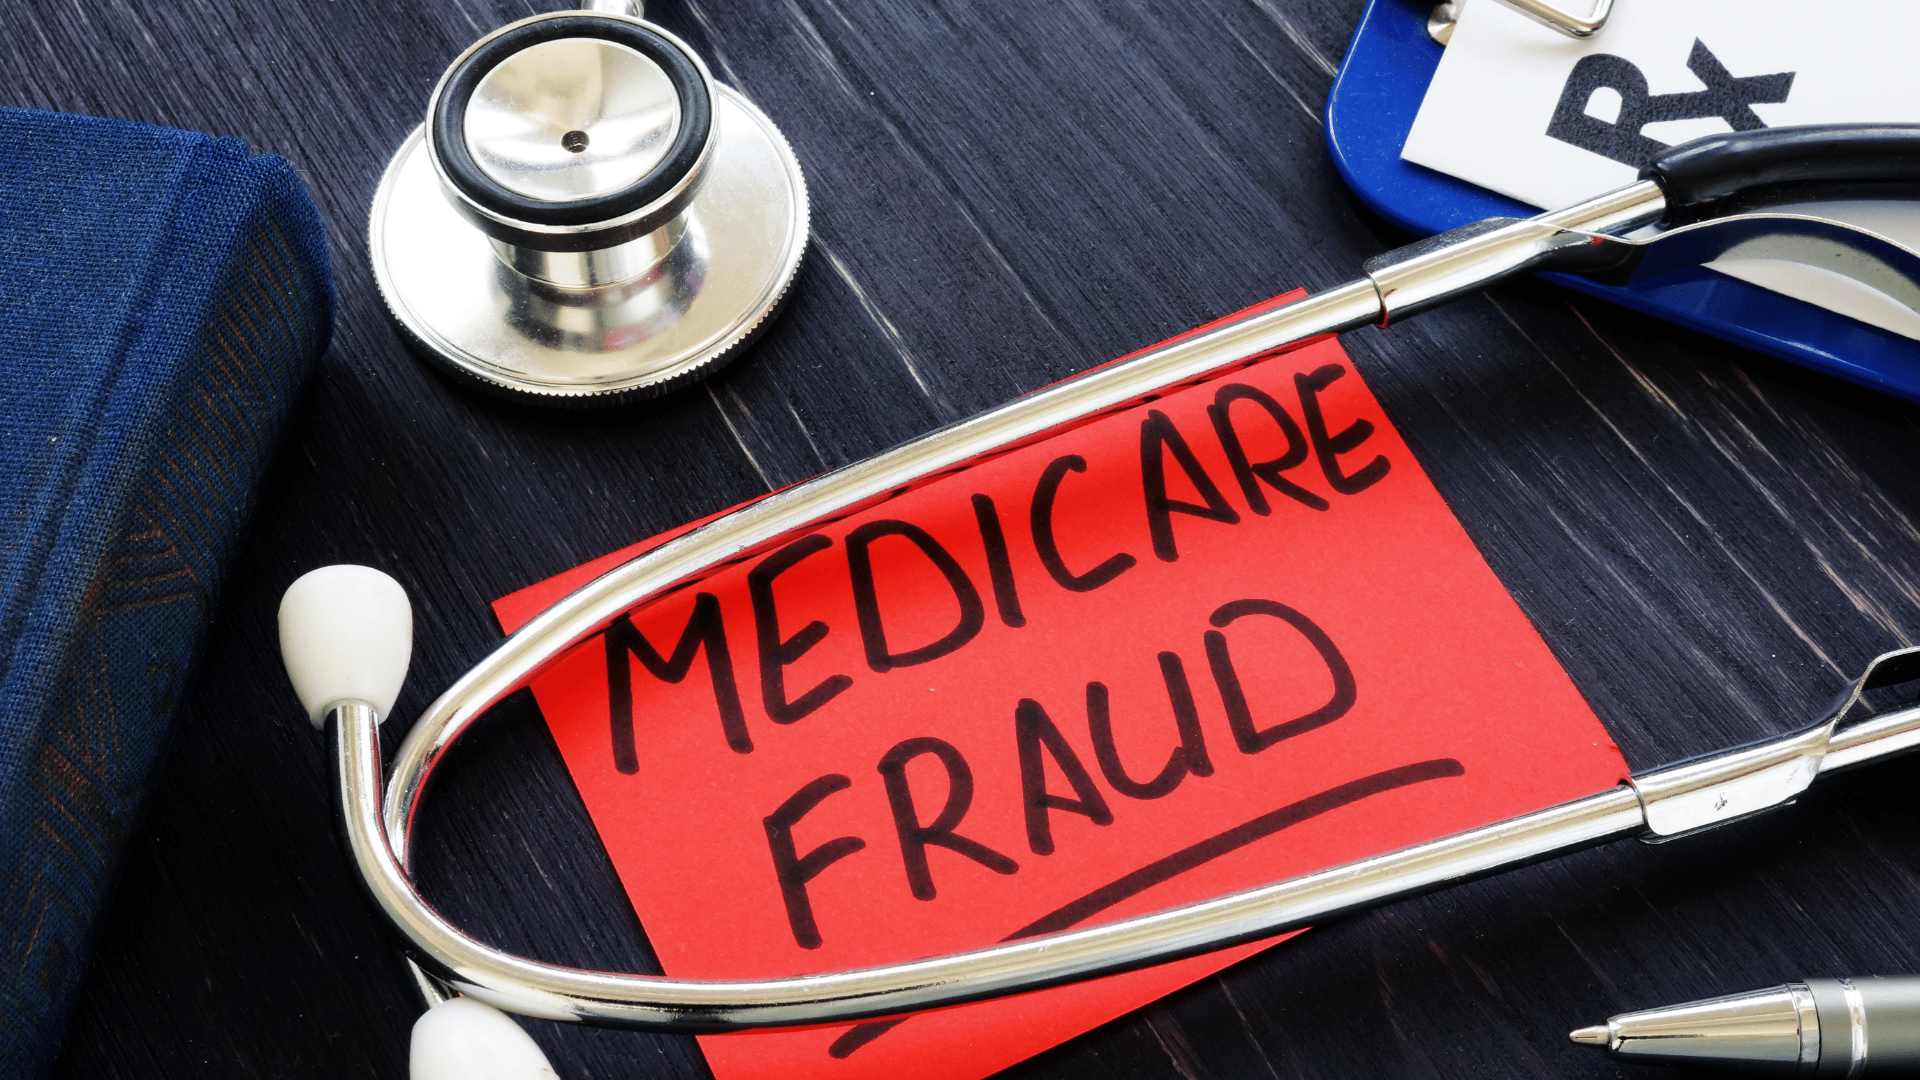 Your Options in Reporting Medicare Fraud at Work